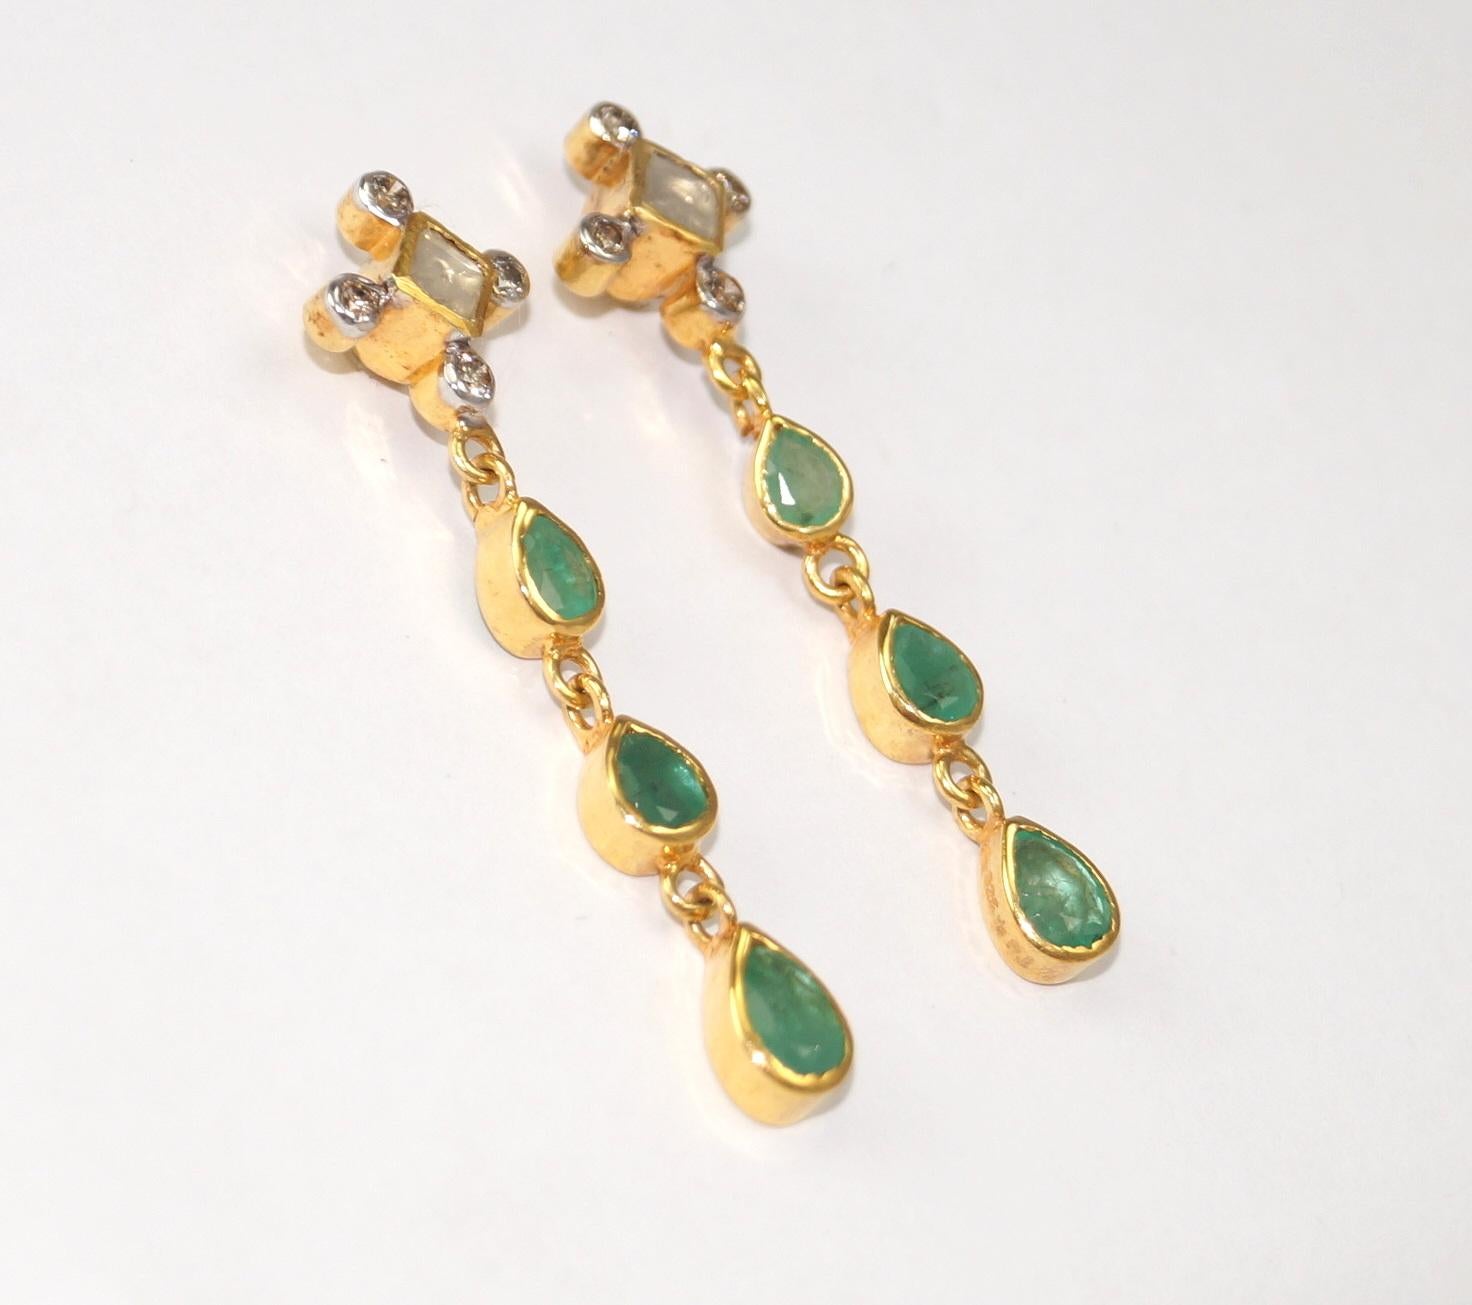 Stunning diamond silver emerald earrings consists of :

Metal- Silver
Metal Purity- sterling silver
Color of metal- Yellow gold plating 
Diamond- Natural uncut diamonds
Diamond origin- Natural earth mined
Diamond weight- 2.50cts
Gemstone- Natural